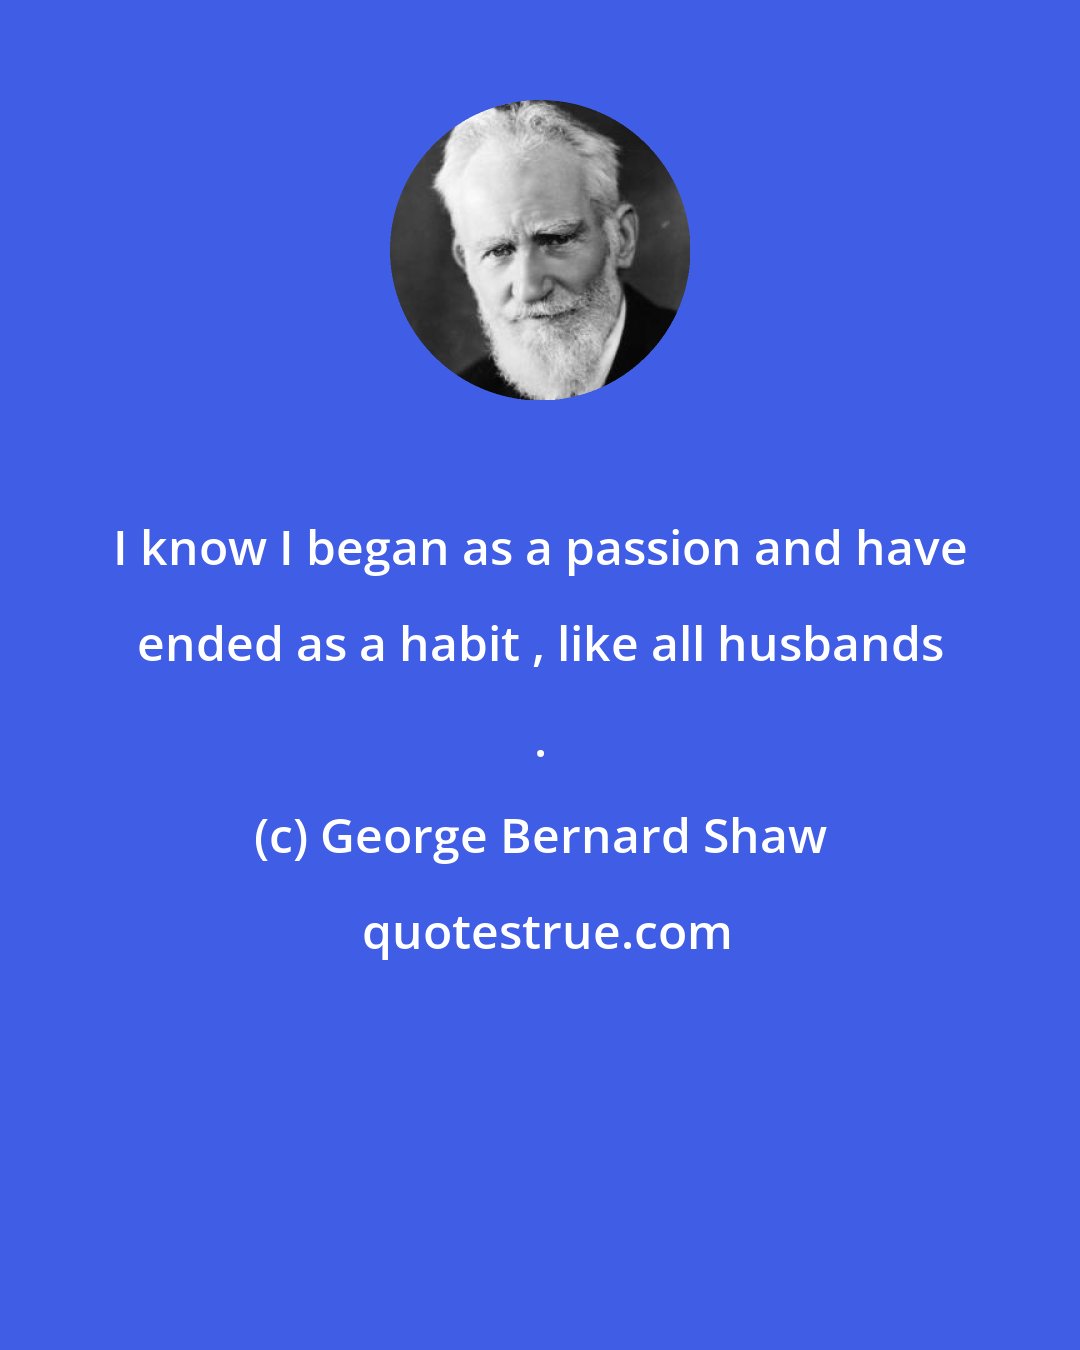 George Bernard Shaw: I know I began as a passion and have ended as a habit , like all husbands .